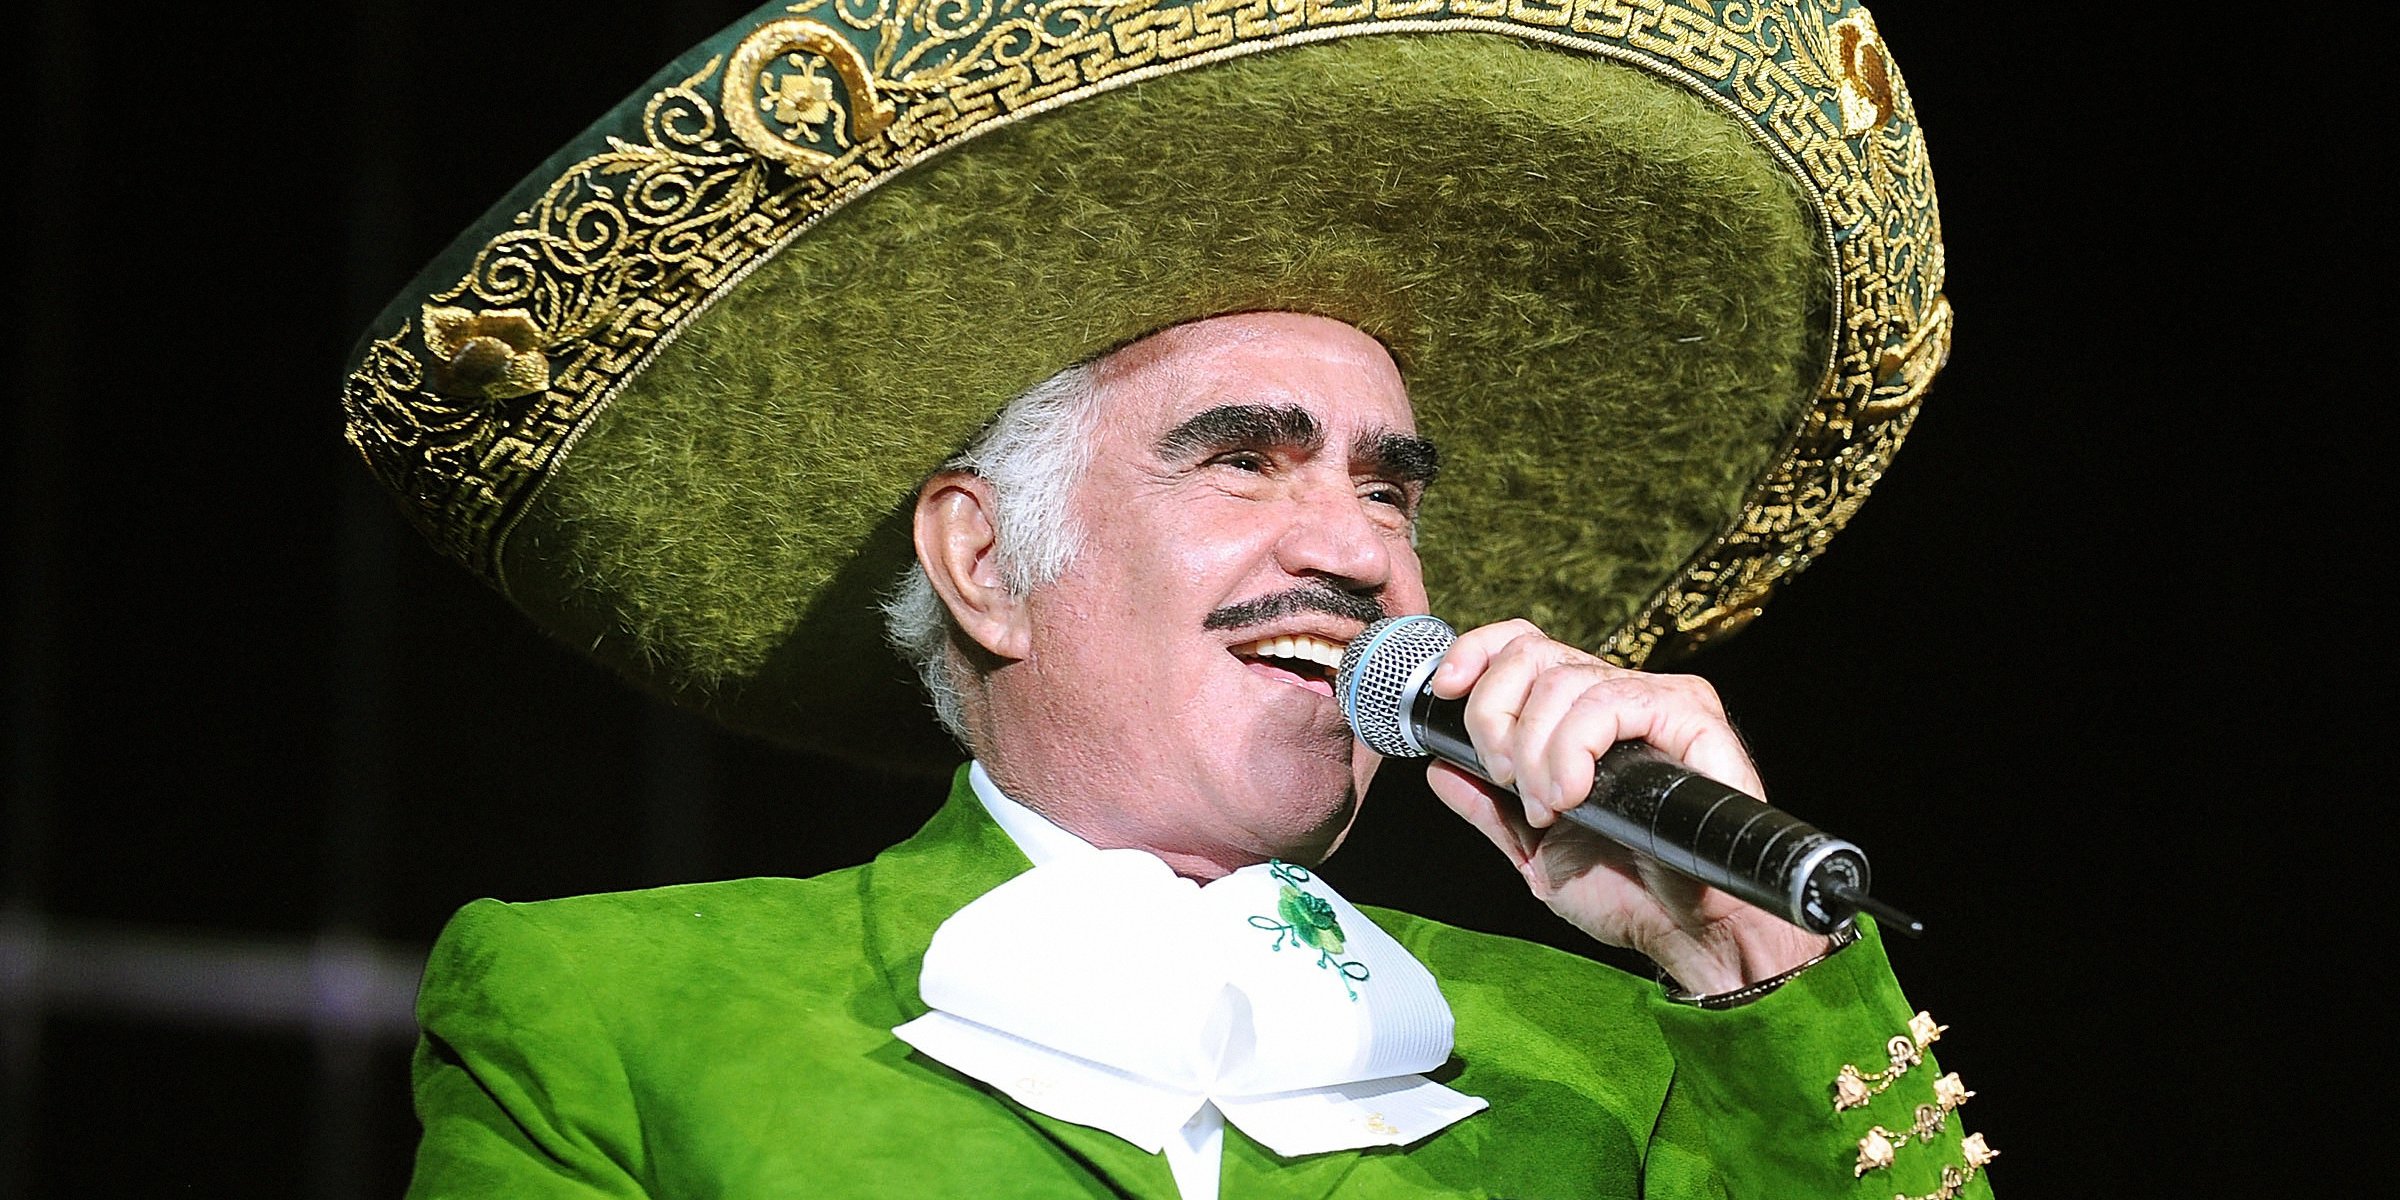 Vicente Fernández | Source: Getty Images